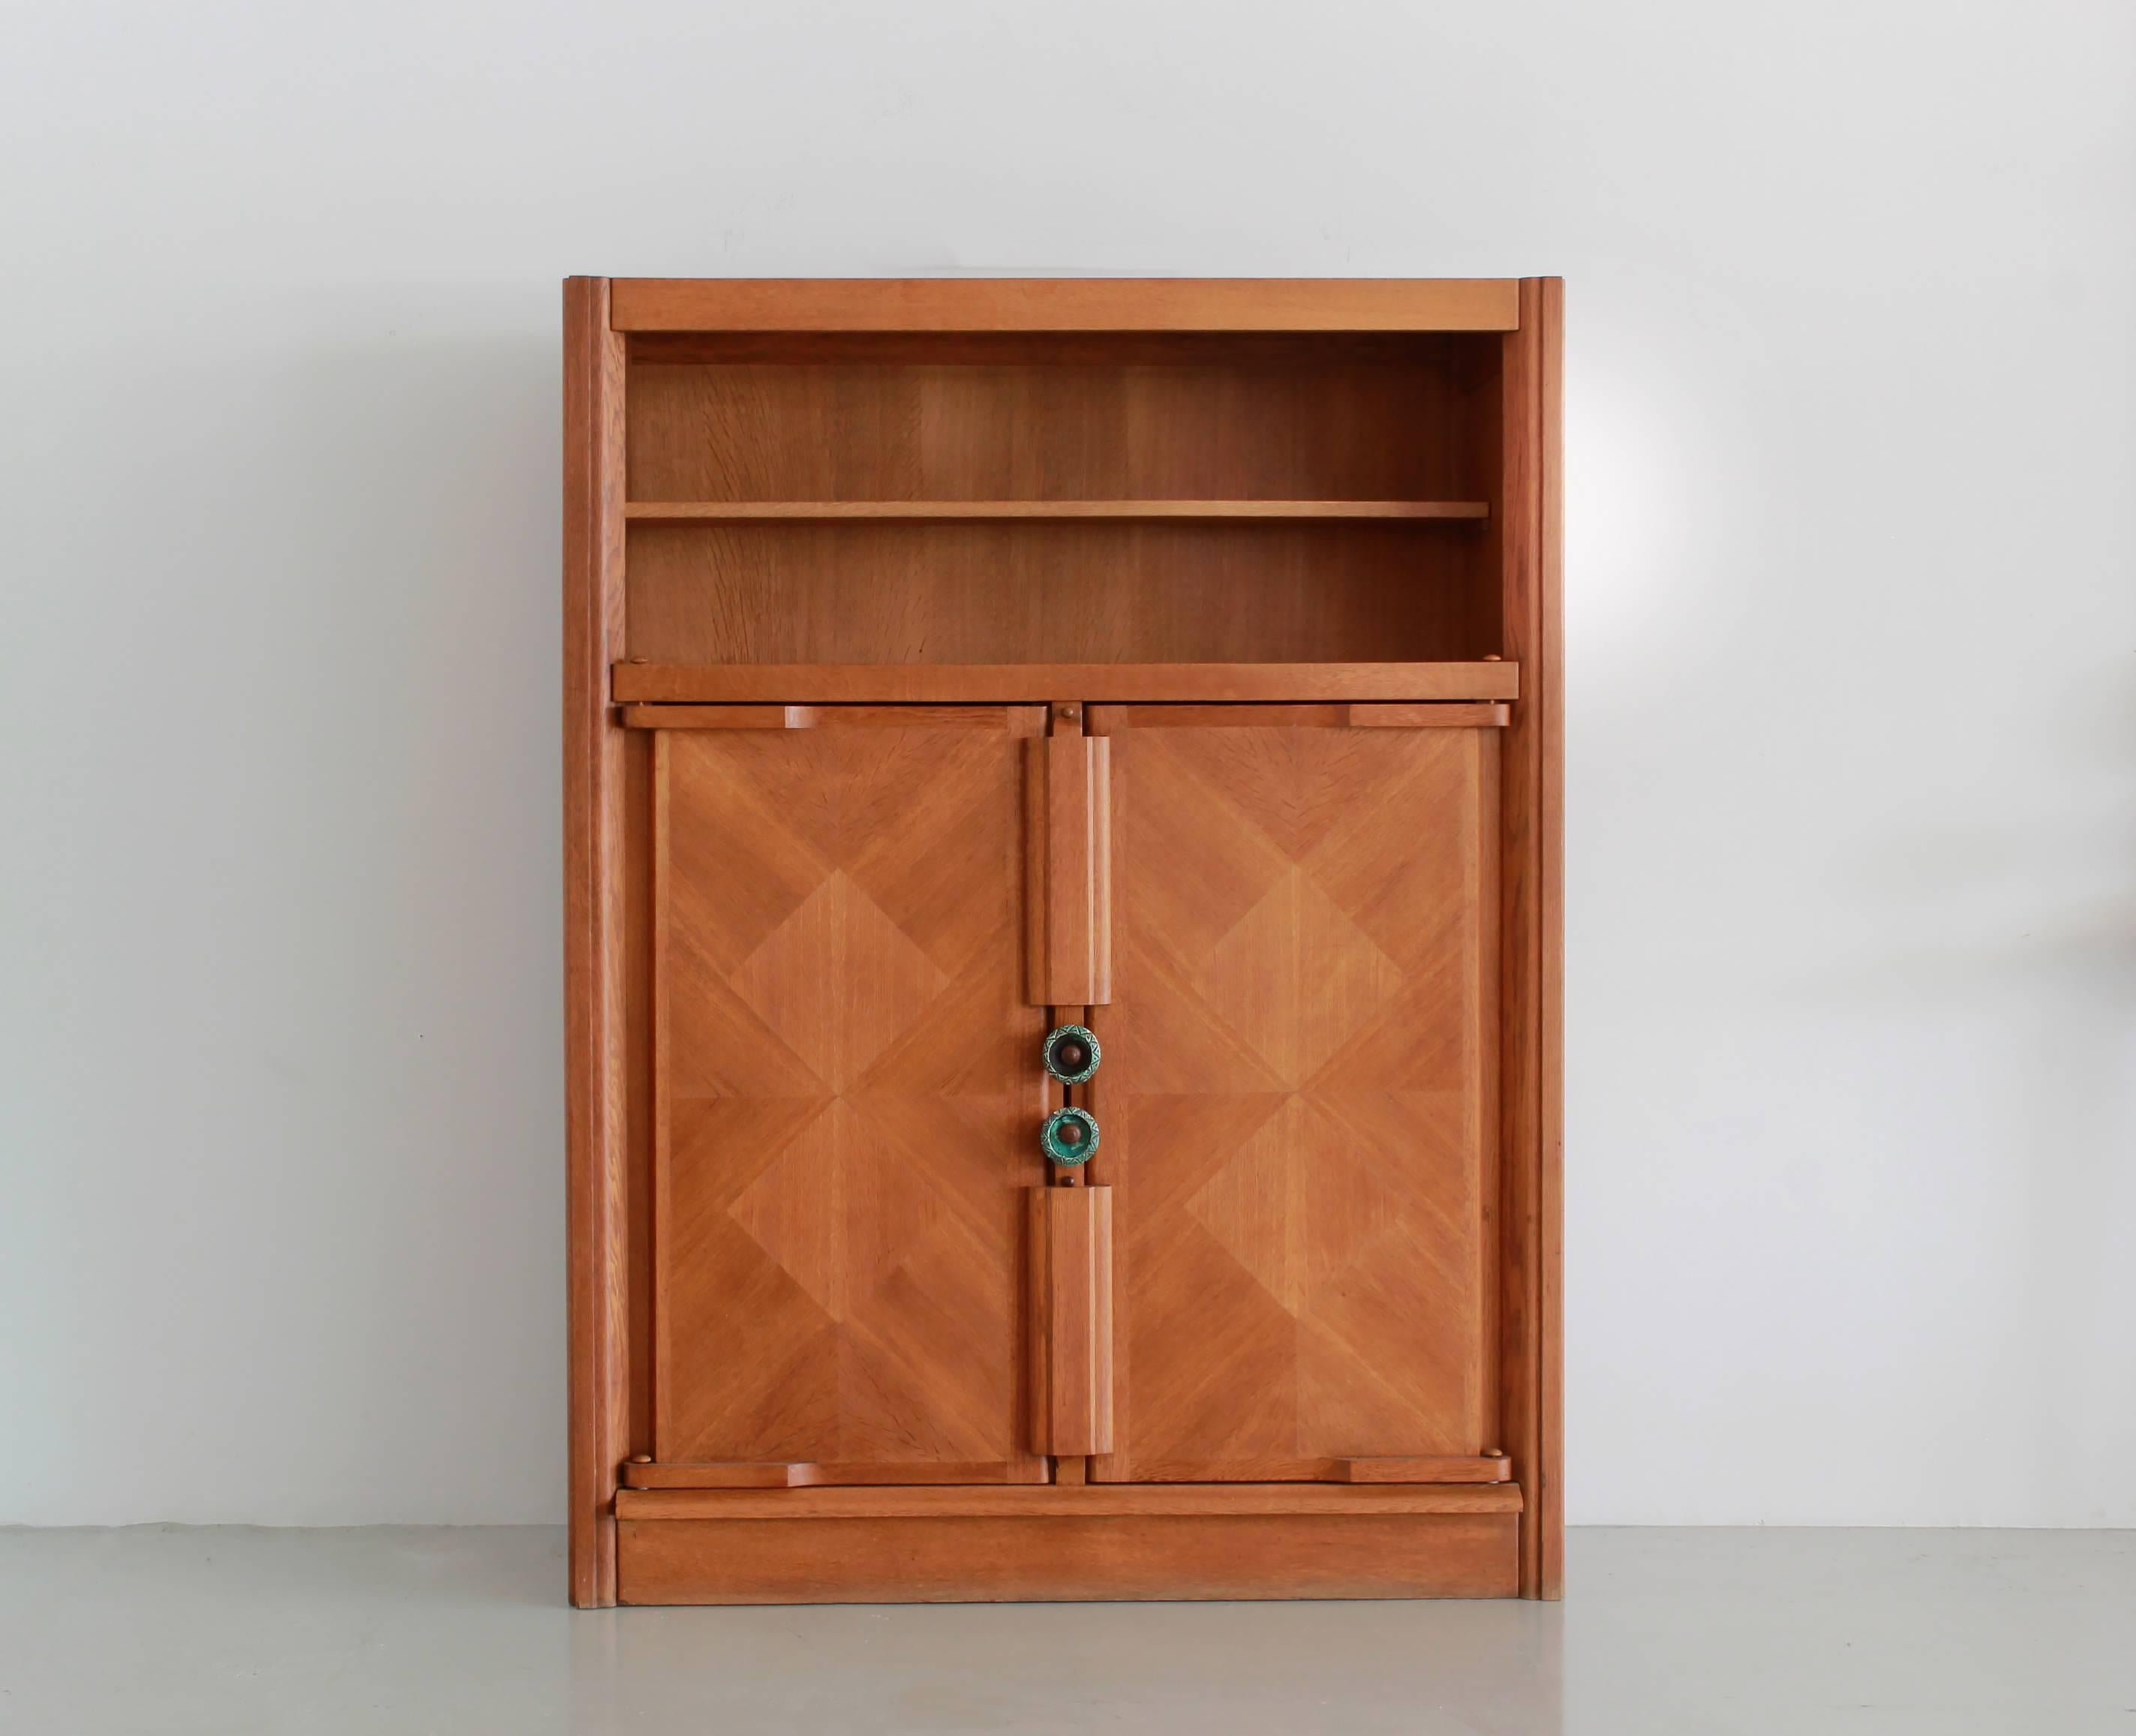 Incredible cabinet by Robert Guillerme (1913-1990) and Jacques Chambron (1914-2001) with an open display shelf and interior shelving enclosed by oak doors in geometric grain pattern and signature ceramic hardware. 
Gorgeous inlaid patterned wood.